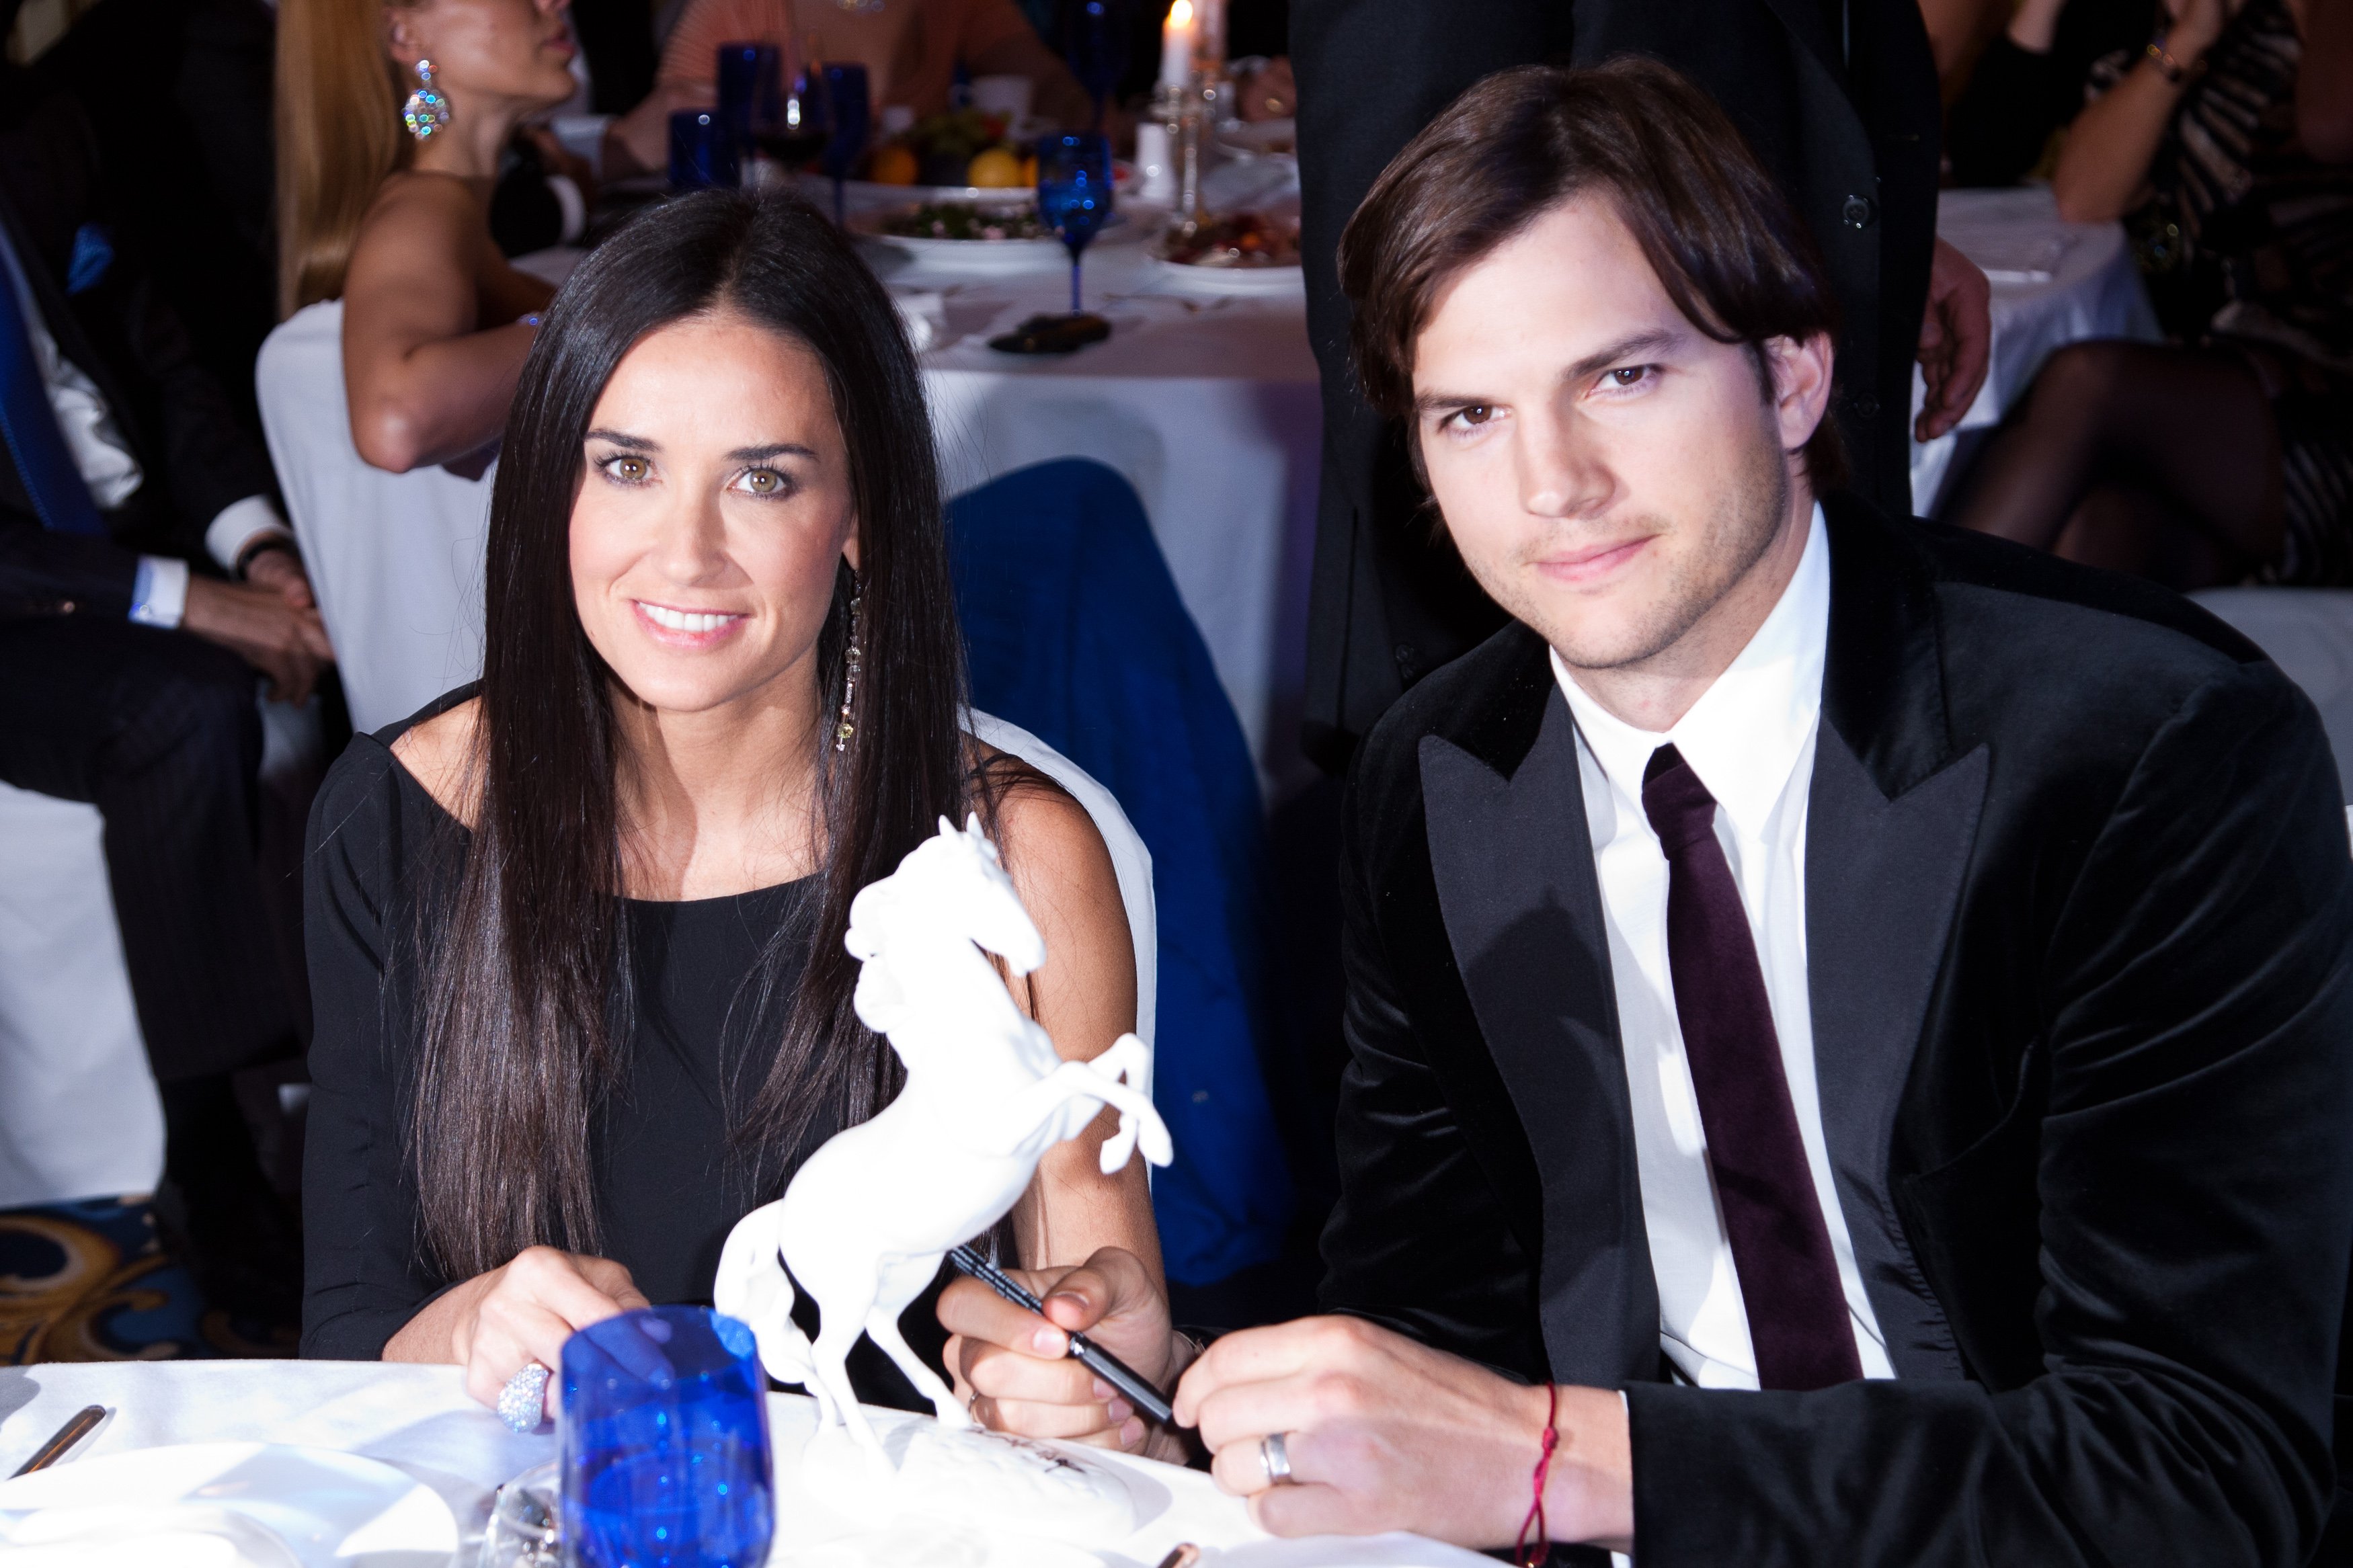 Demi Moore and Ashton Kutcher attend the Charity Gala at The Ritz-Carlton | Source: Getty Images